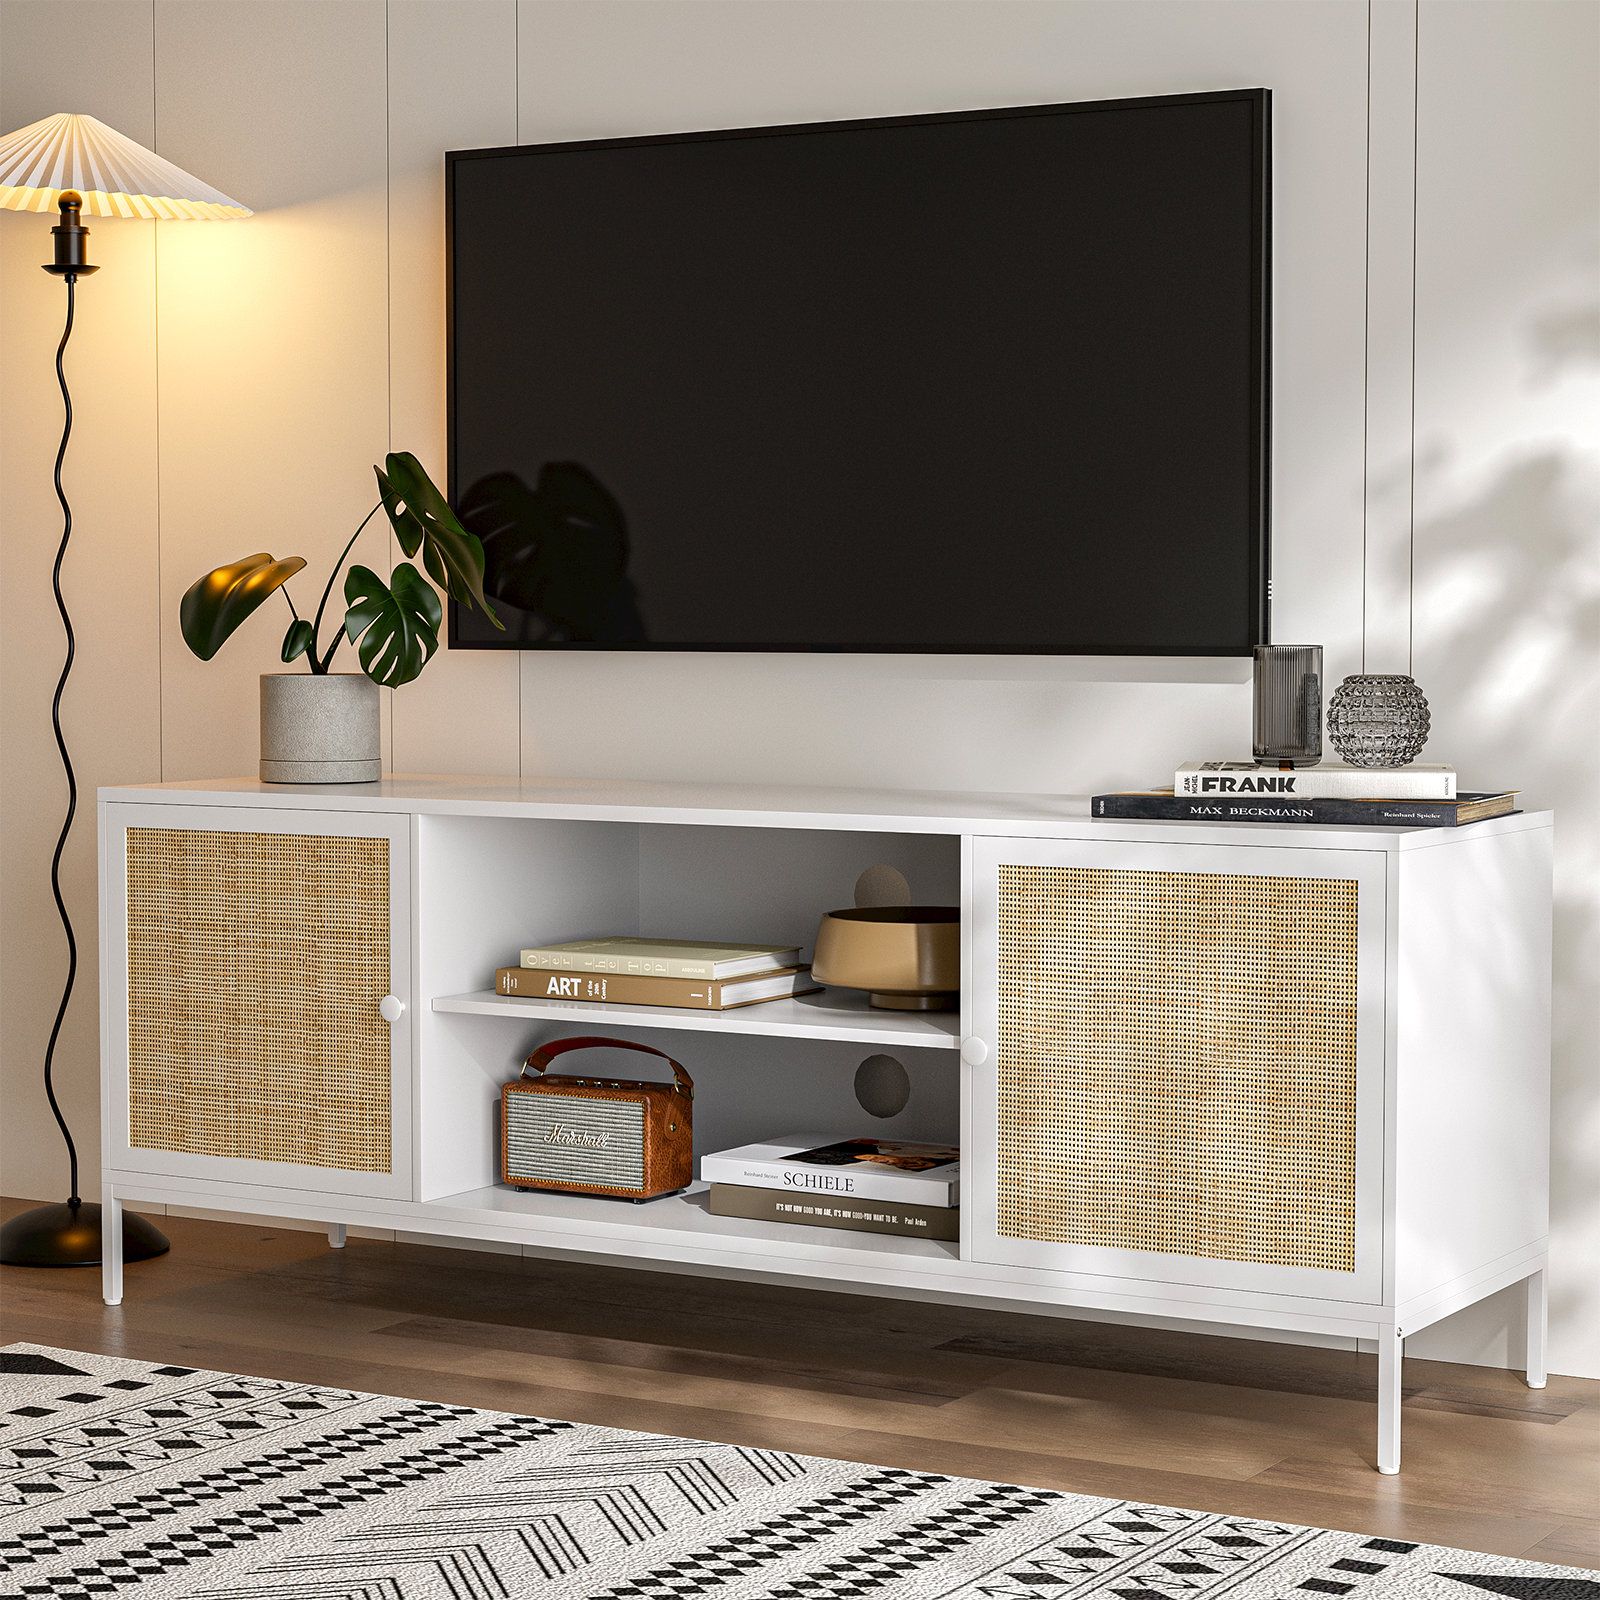 Bay Isle Home Manel Rattan Tv Stand For 65 Inch Tv, Farmhouse Entertainment  Center | Wayfair Pertaining To Farmhouse Rattan Tv Stands (View 9 of 15)